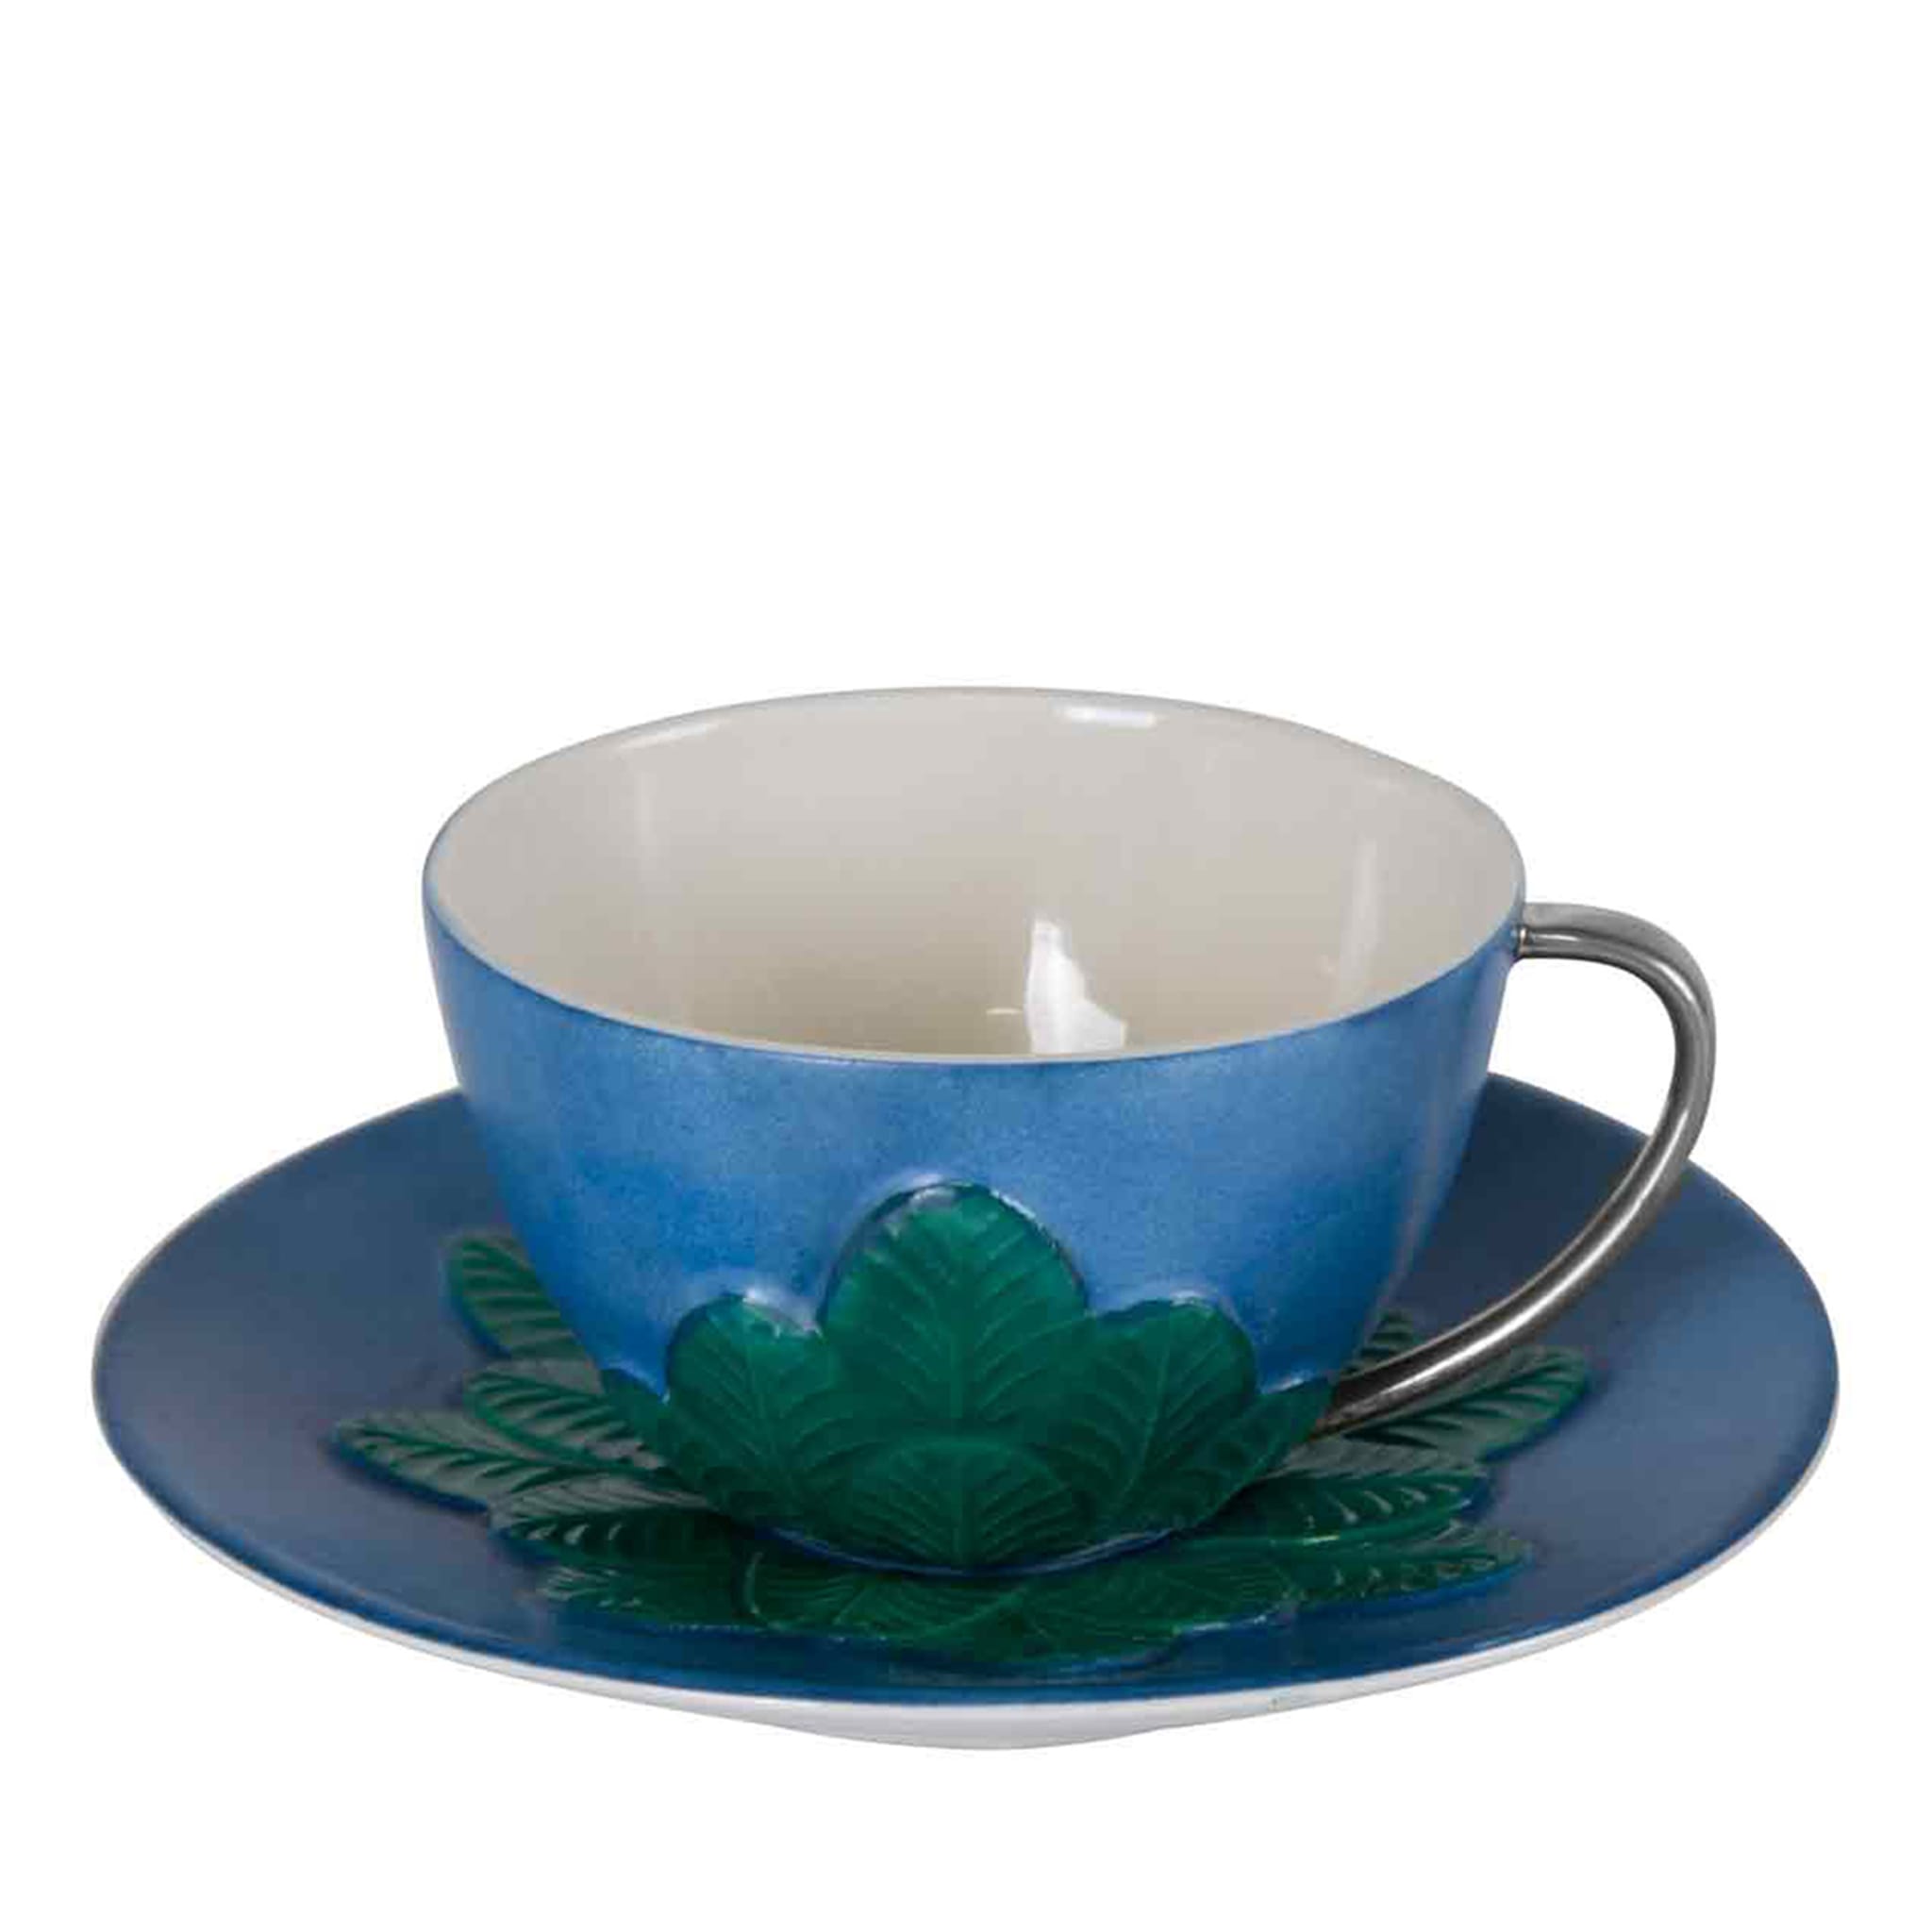 PEACOCK TEA CUP - BLUE AND SILVER - Main view